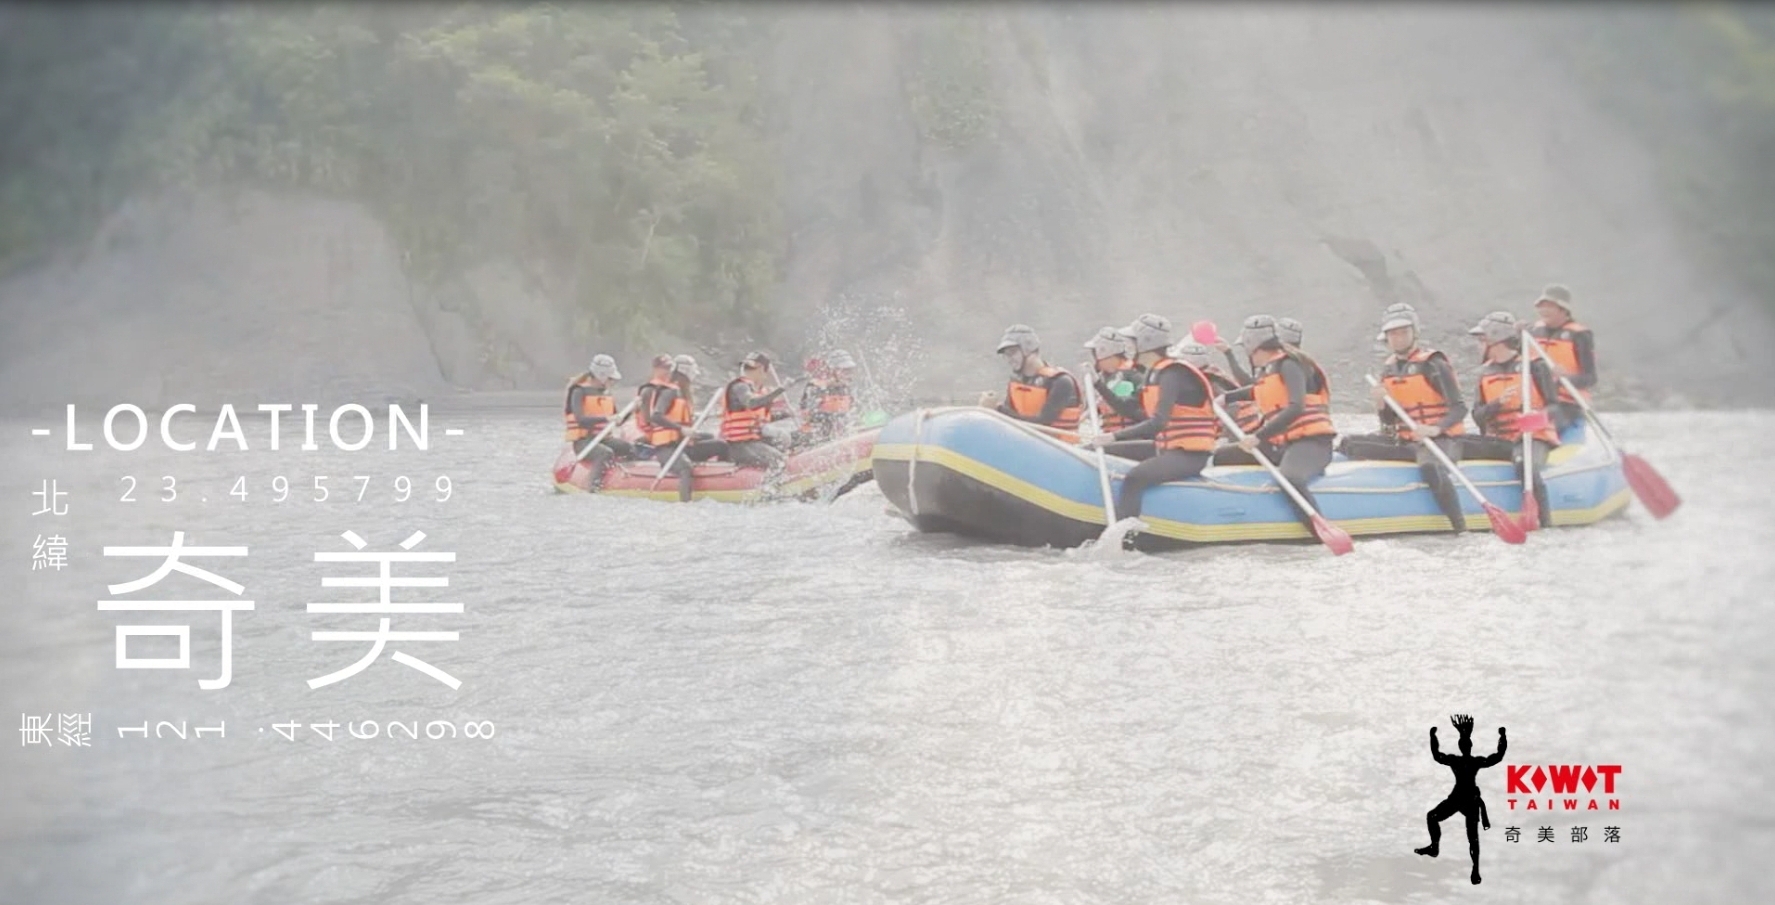  Go on an Authentic Boat Trip: Kiwit Tribe Cultural Rafting as a Movie